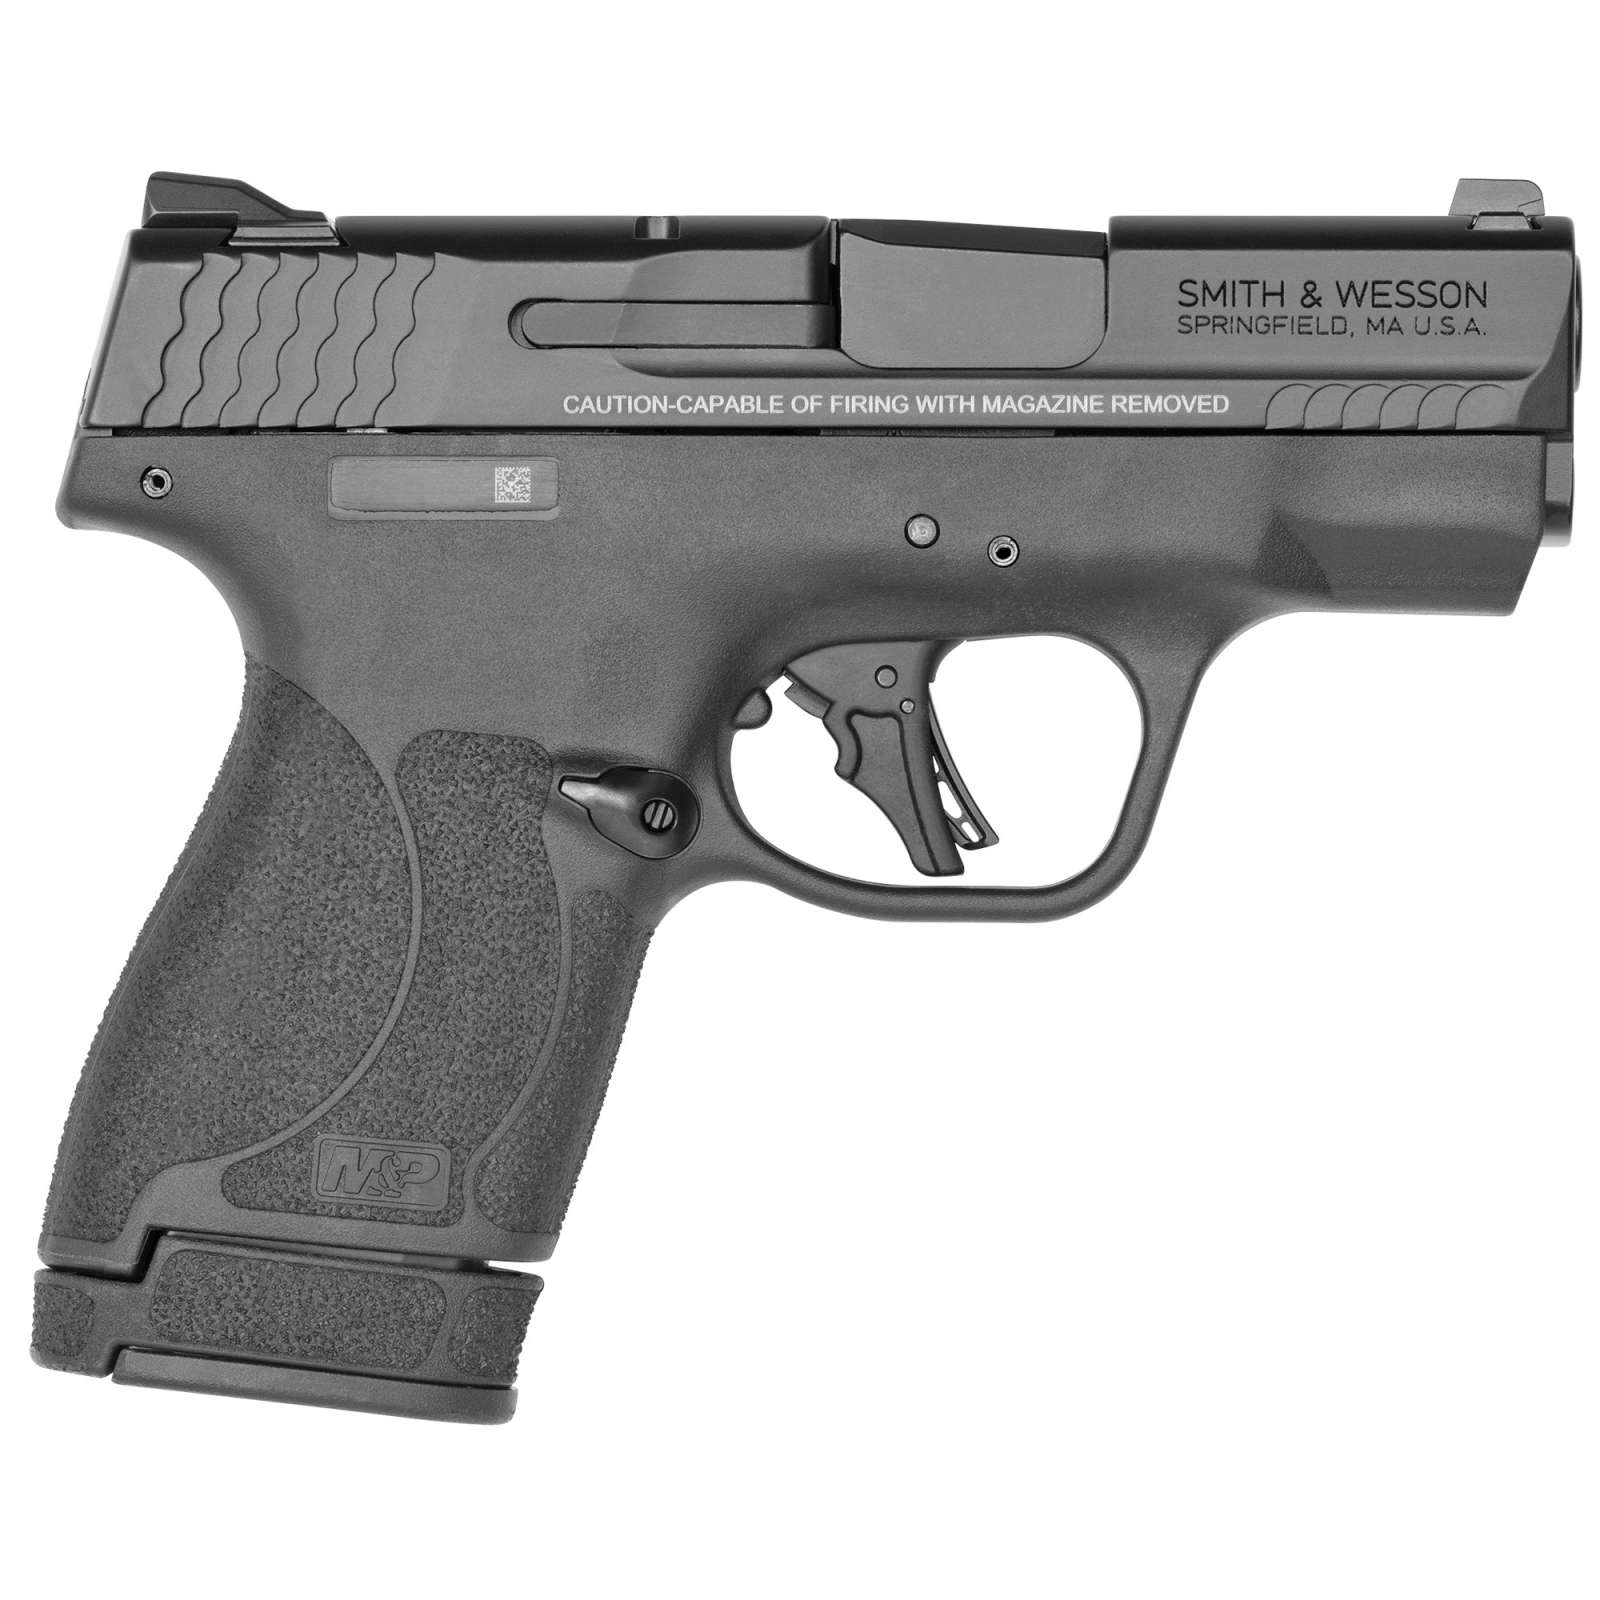 SMITH & WESSON S&W M&P 9 SHIELD PISTOL 9MM-img-1